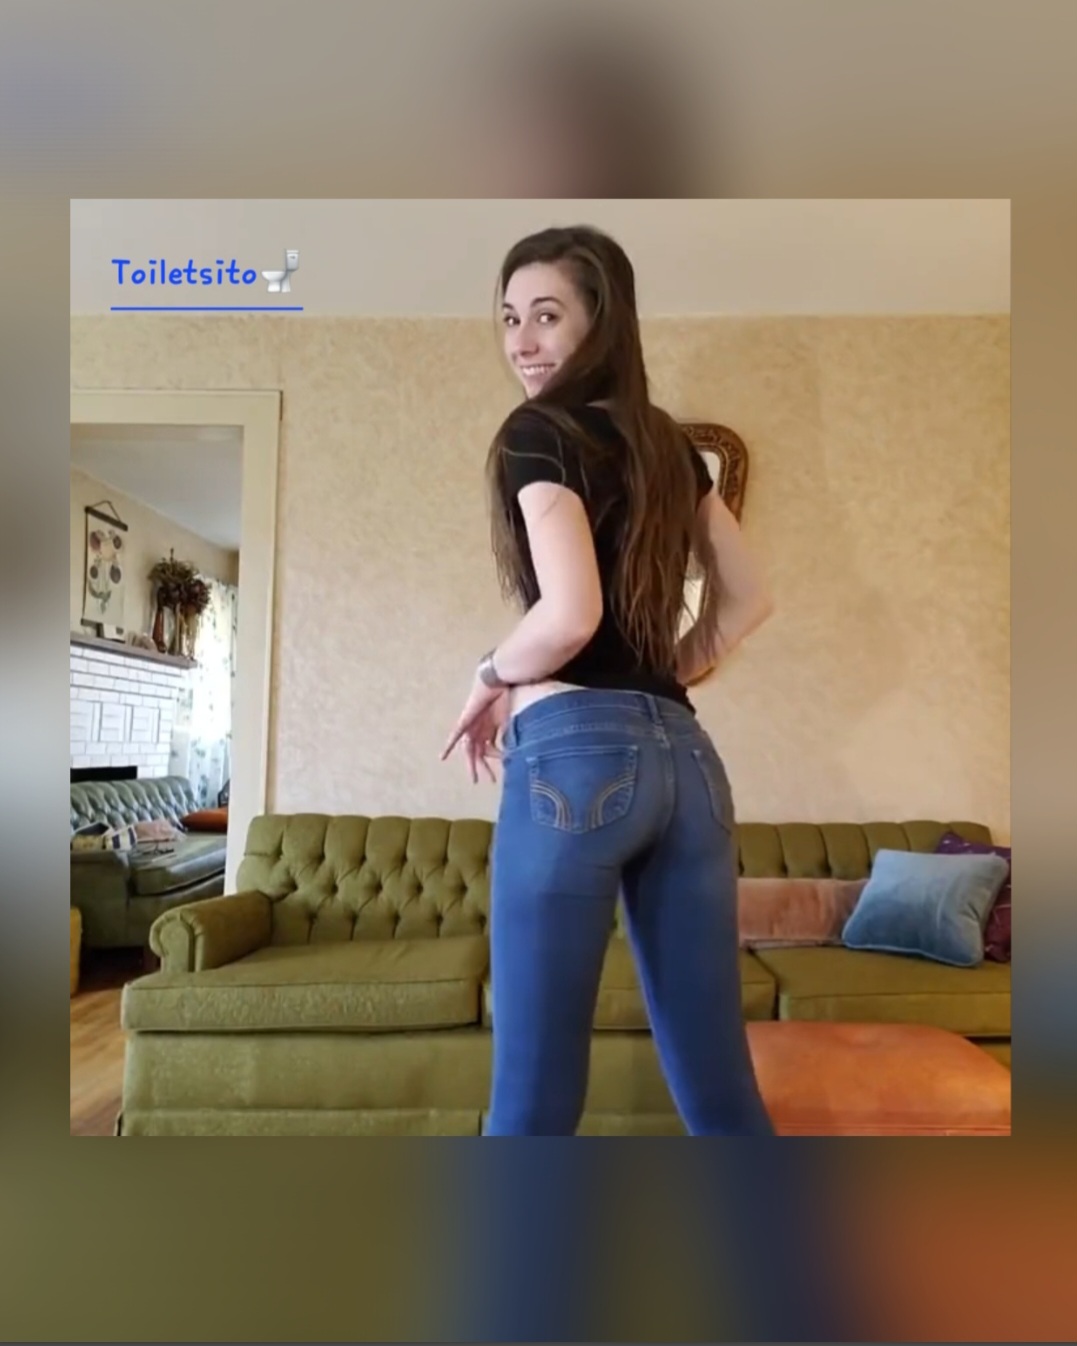 Sexy Teenage Girl Pissing Her Pants- Pissing Teens